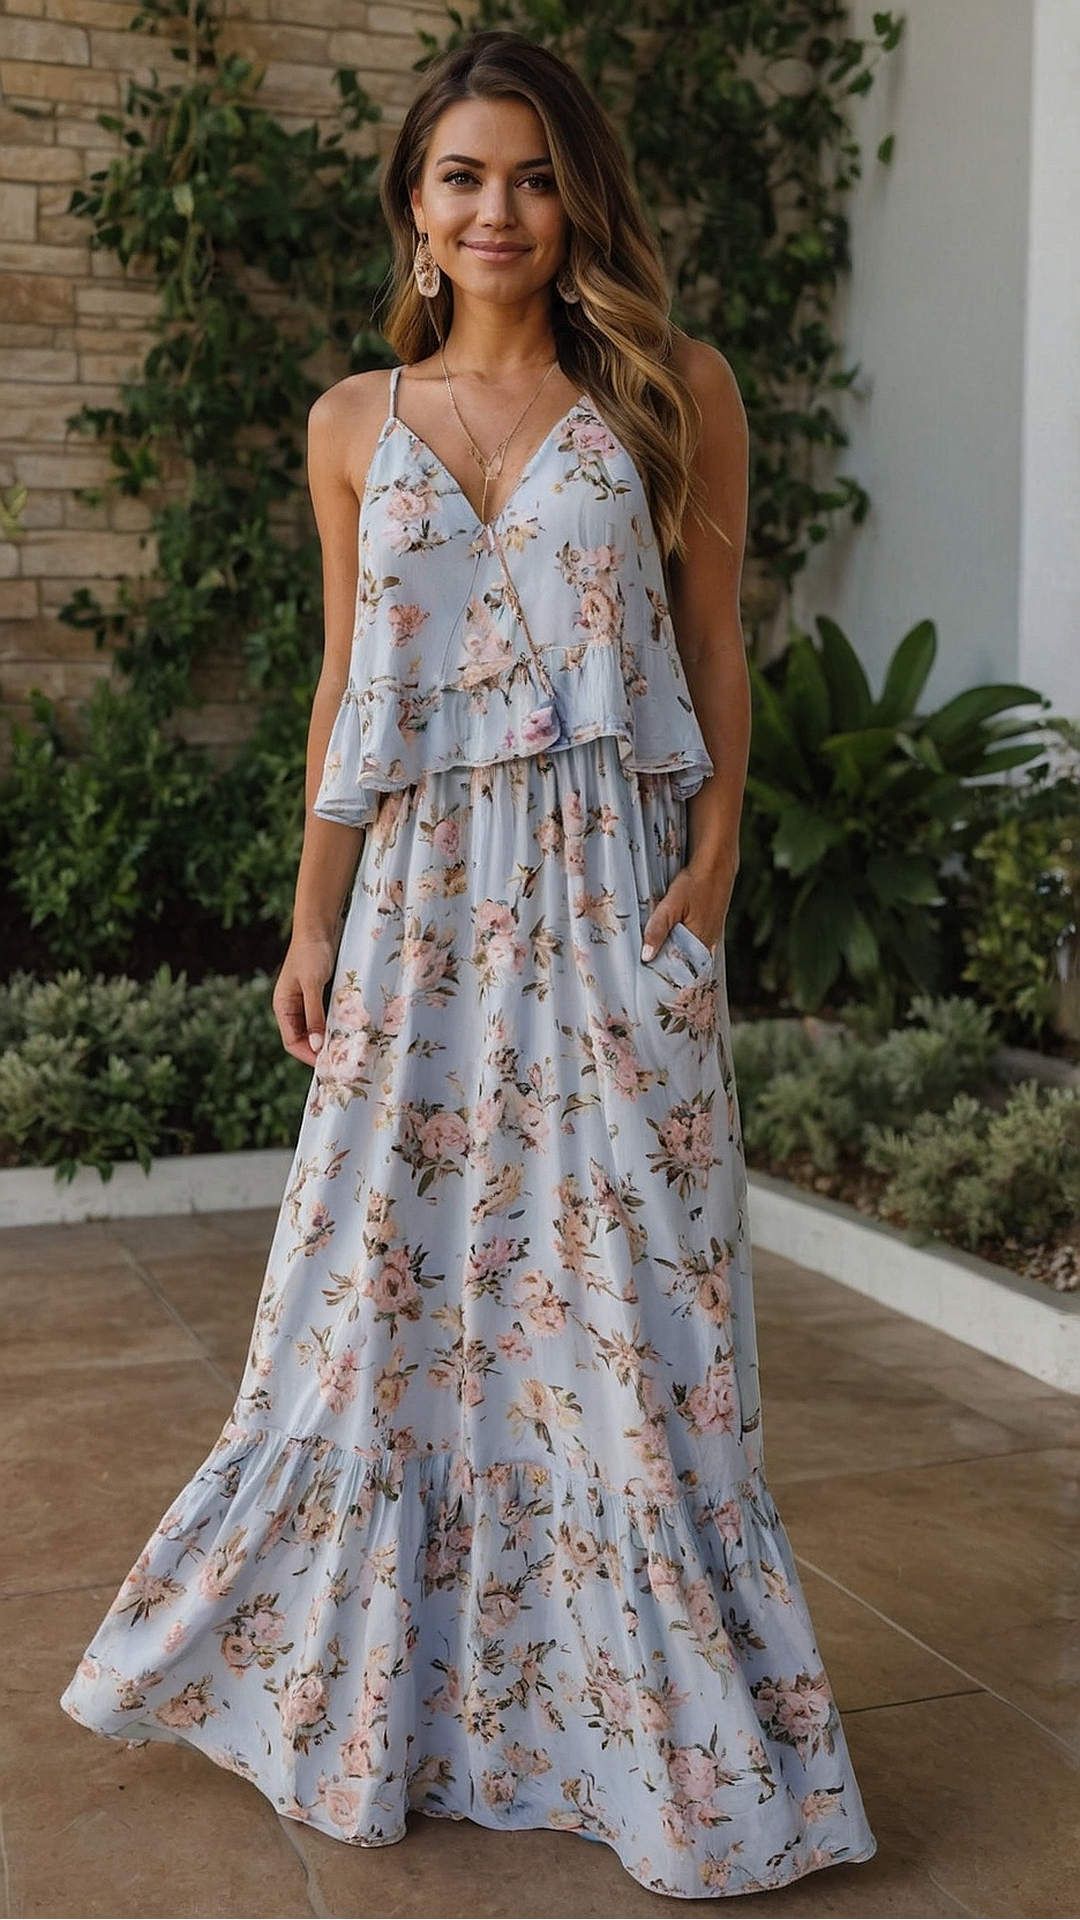 Rose Garden Glamour: Floral Maxi Dress Creations